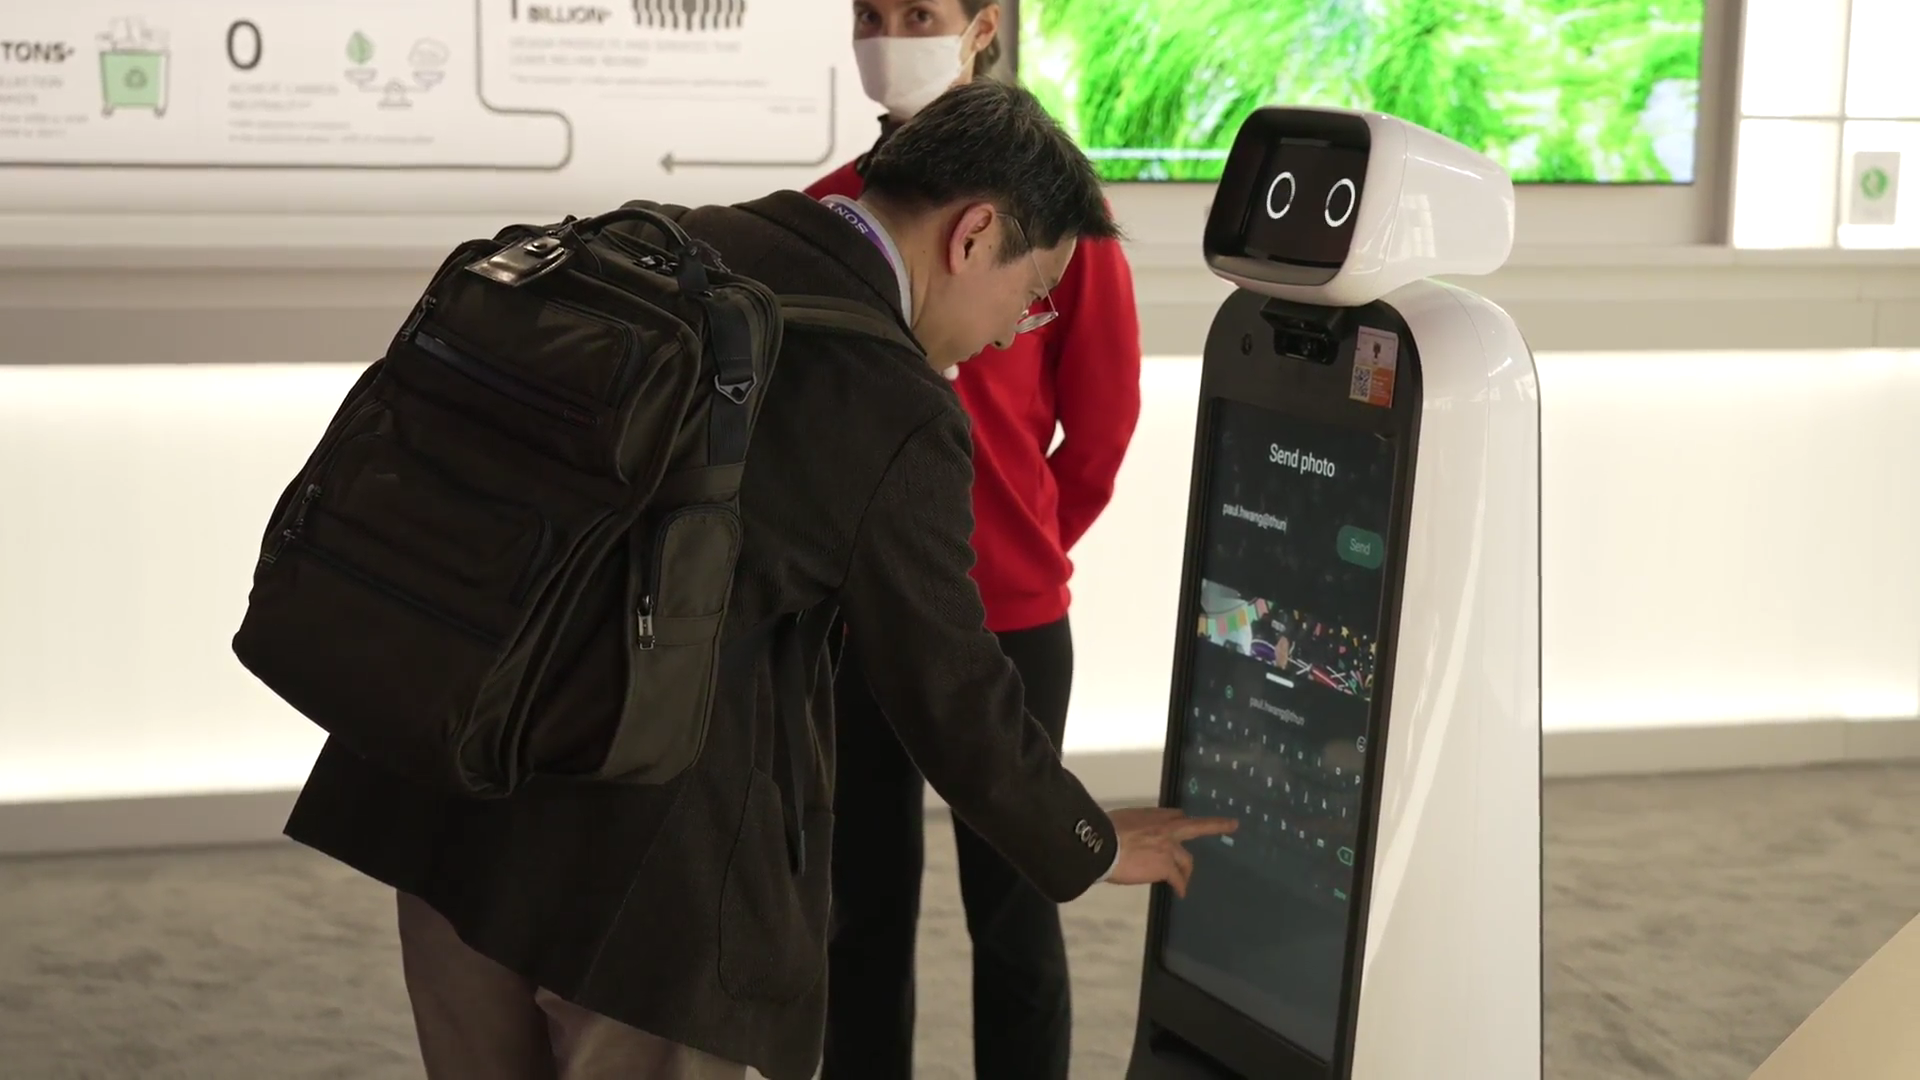 A visitor at LG Booth getting some help from LG CLOi GuideBot